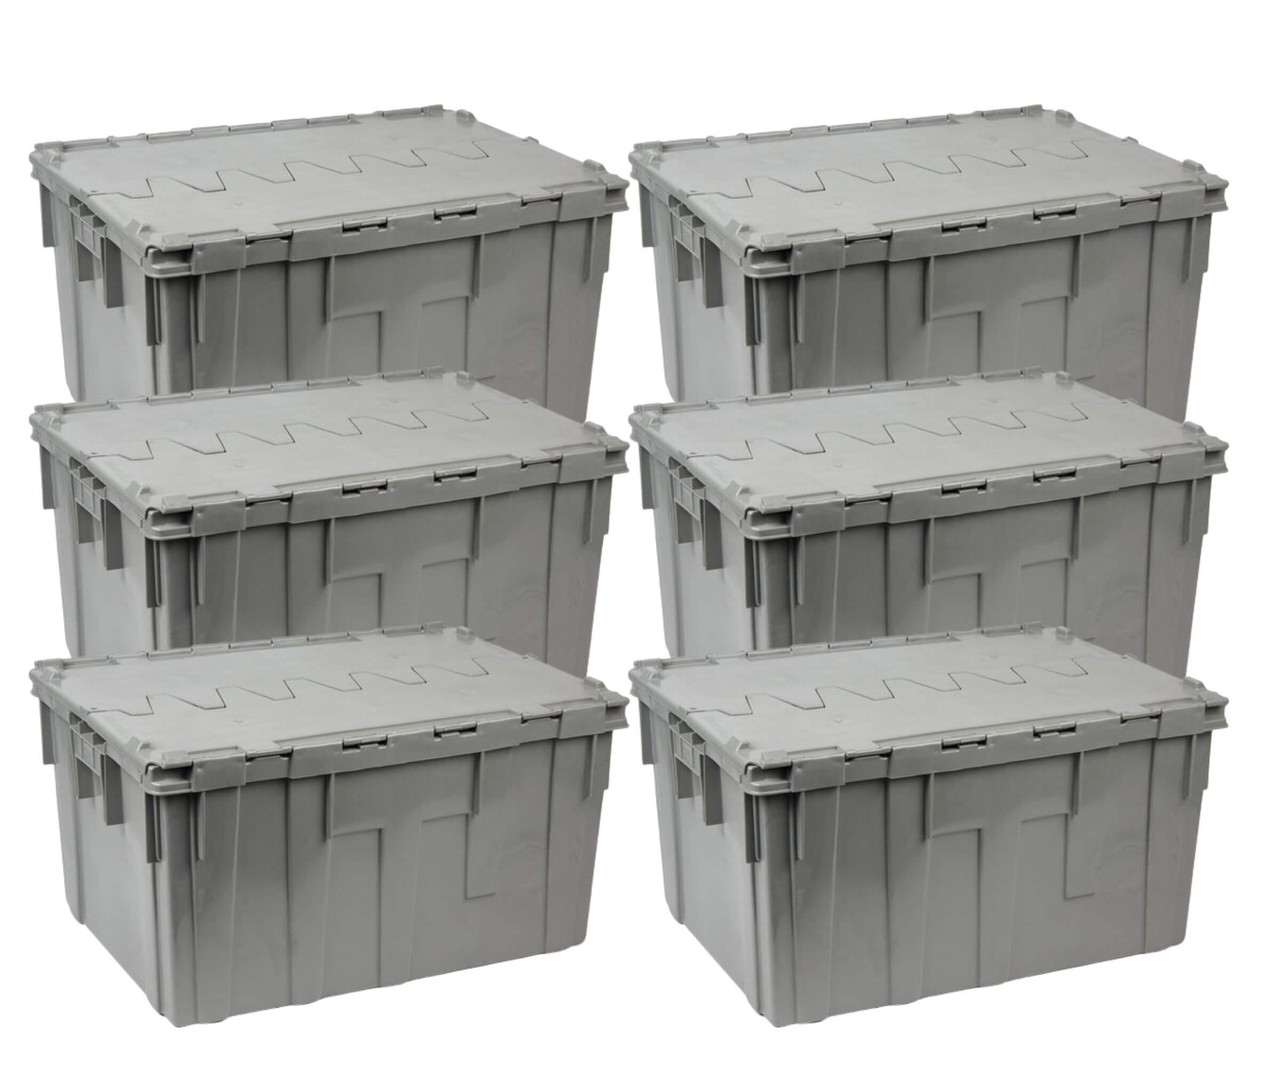 Bon Chef 28" x 21" x 15" Gray Reinforced Plastic Chafer Box with Locking Lid (6-Pack) - Durable and Secure Chafer Storage Solution-Chicken Pieces